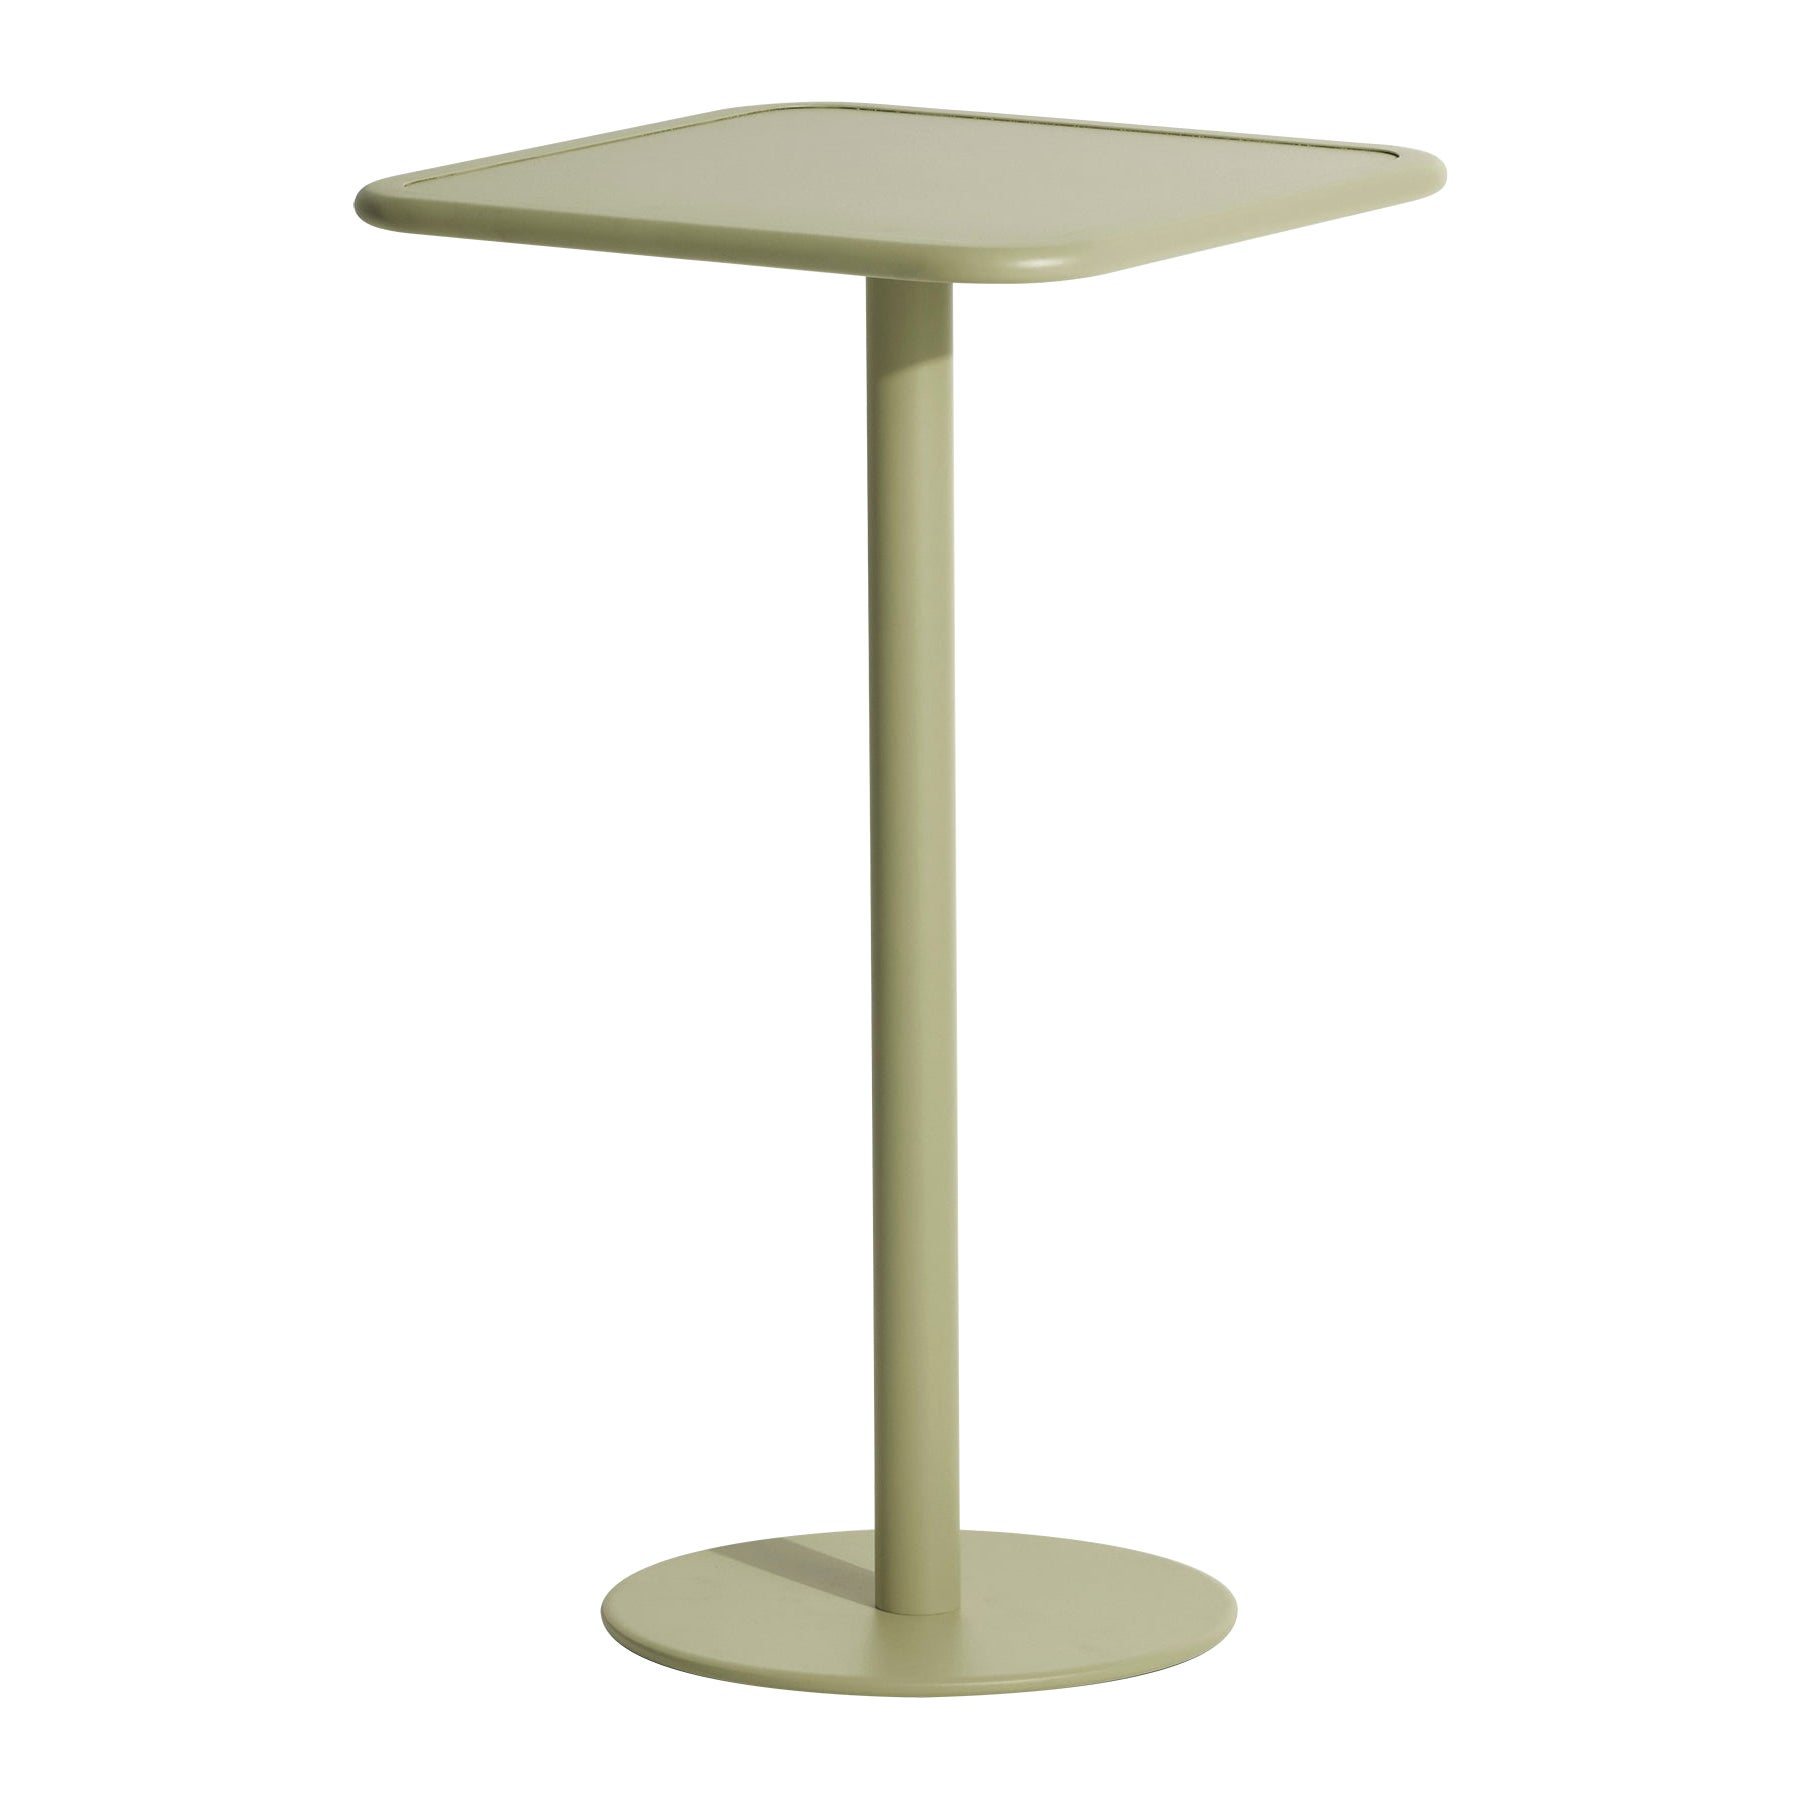 Petite Friture Week-End Square High Table in Jade Green Aluminium, 2017 For Sale